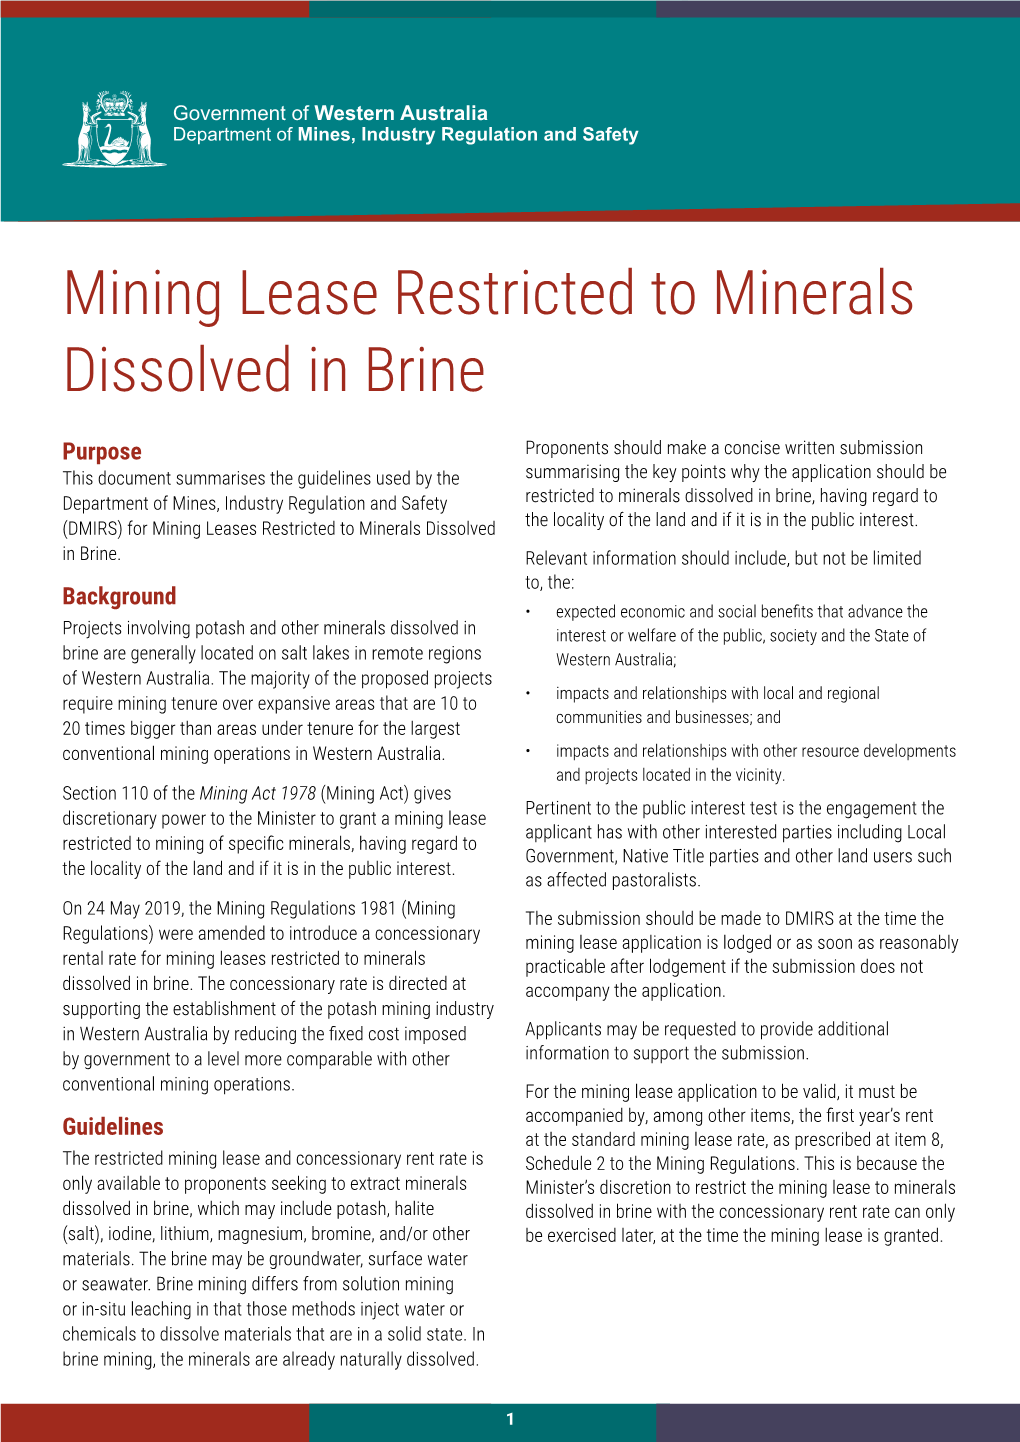 Mining Lease Restricted to Minerals Dissolved in Brine